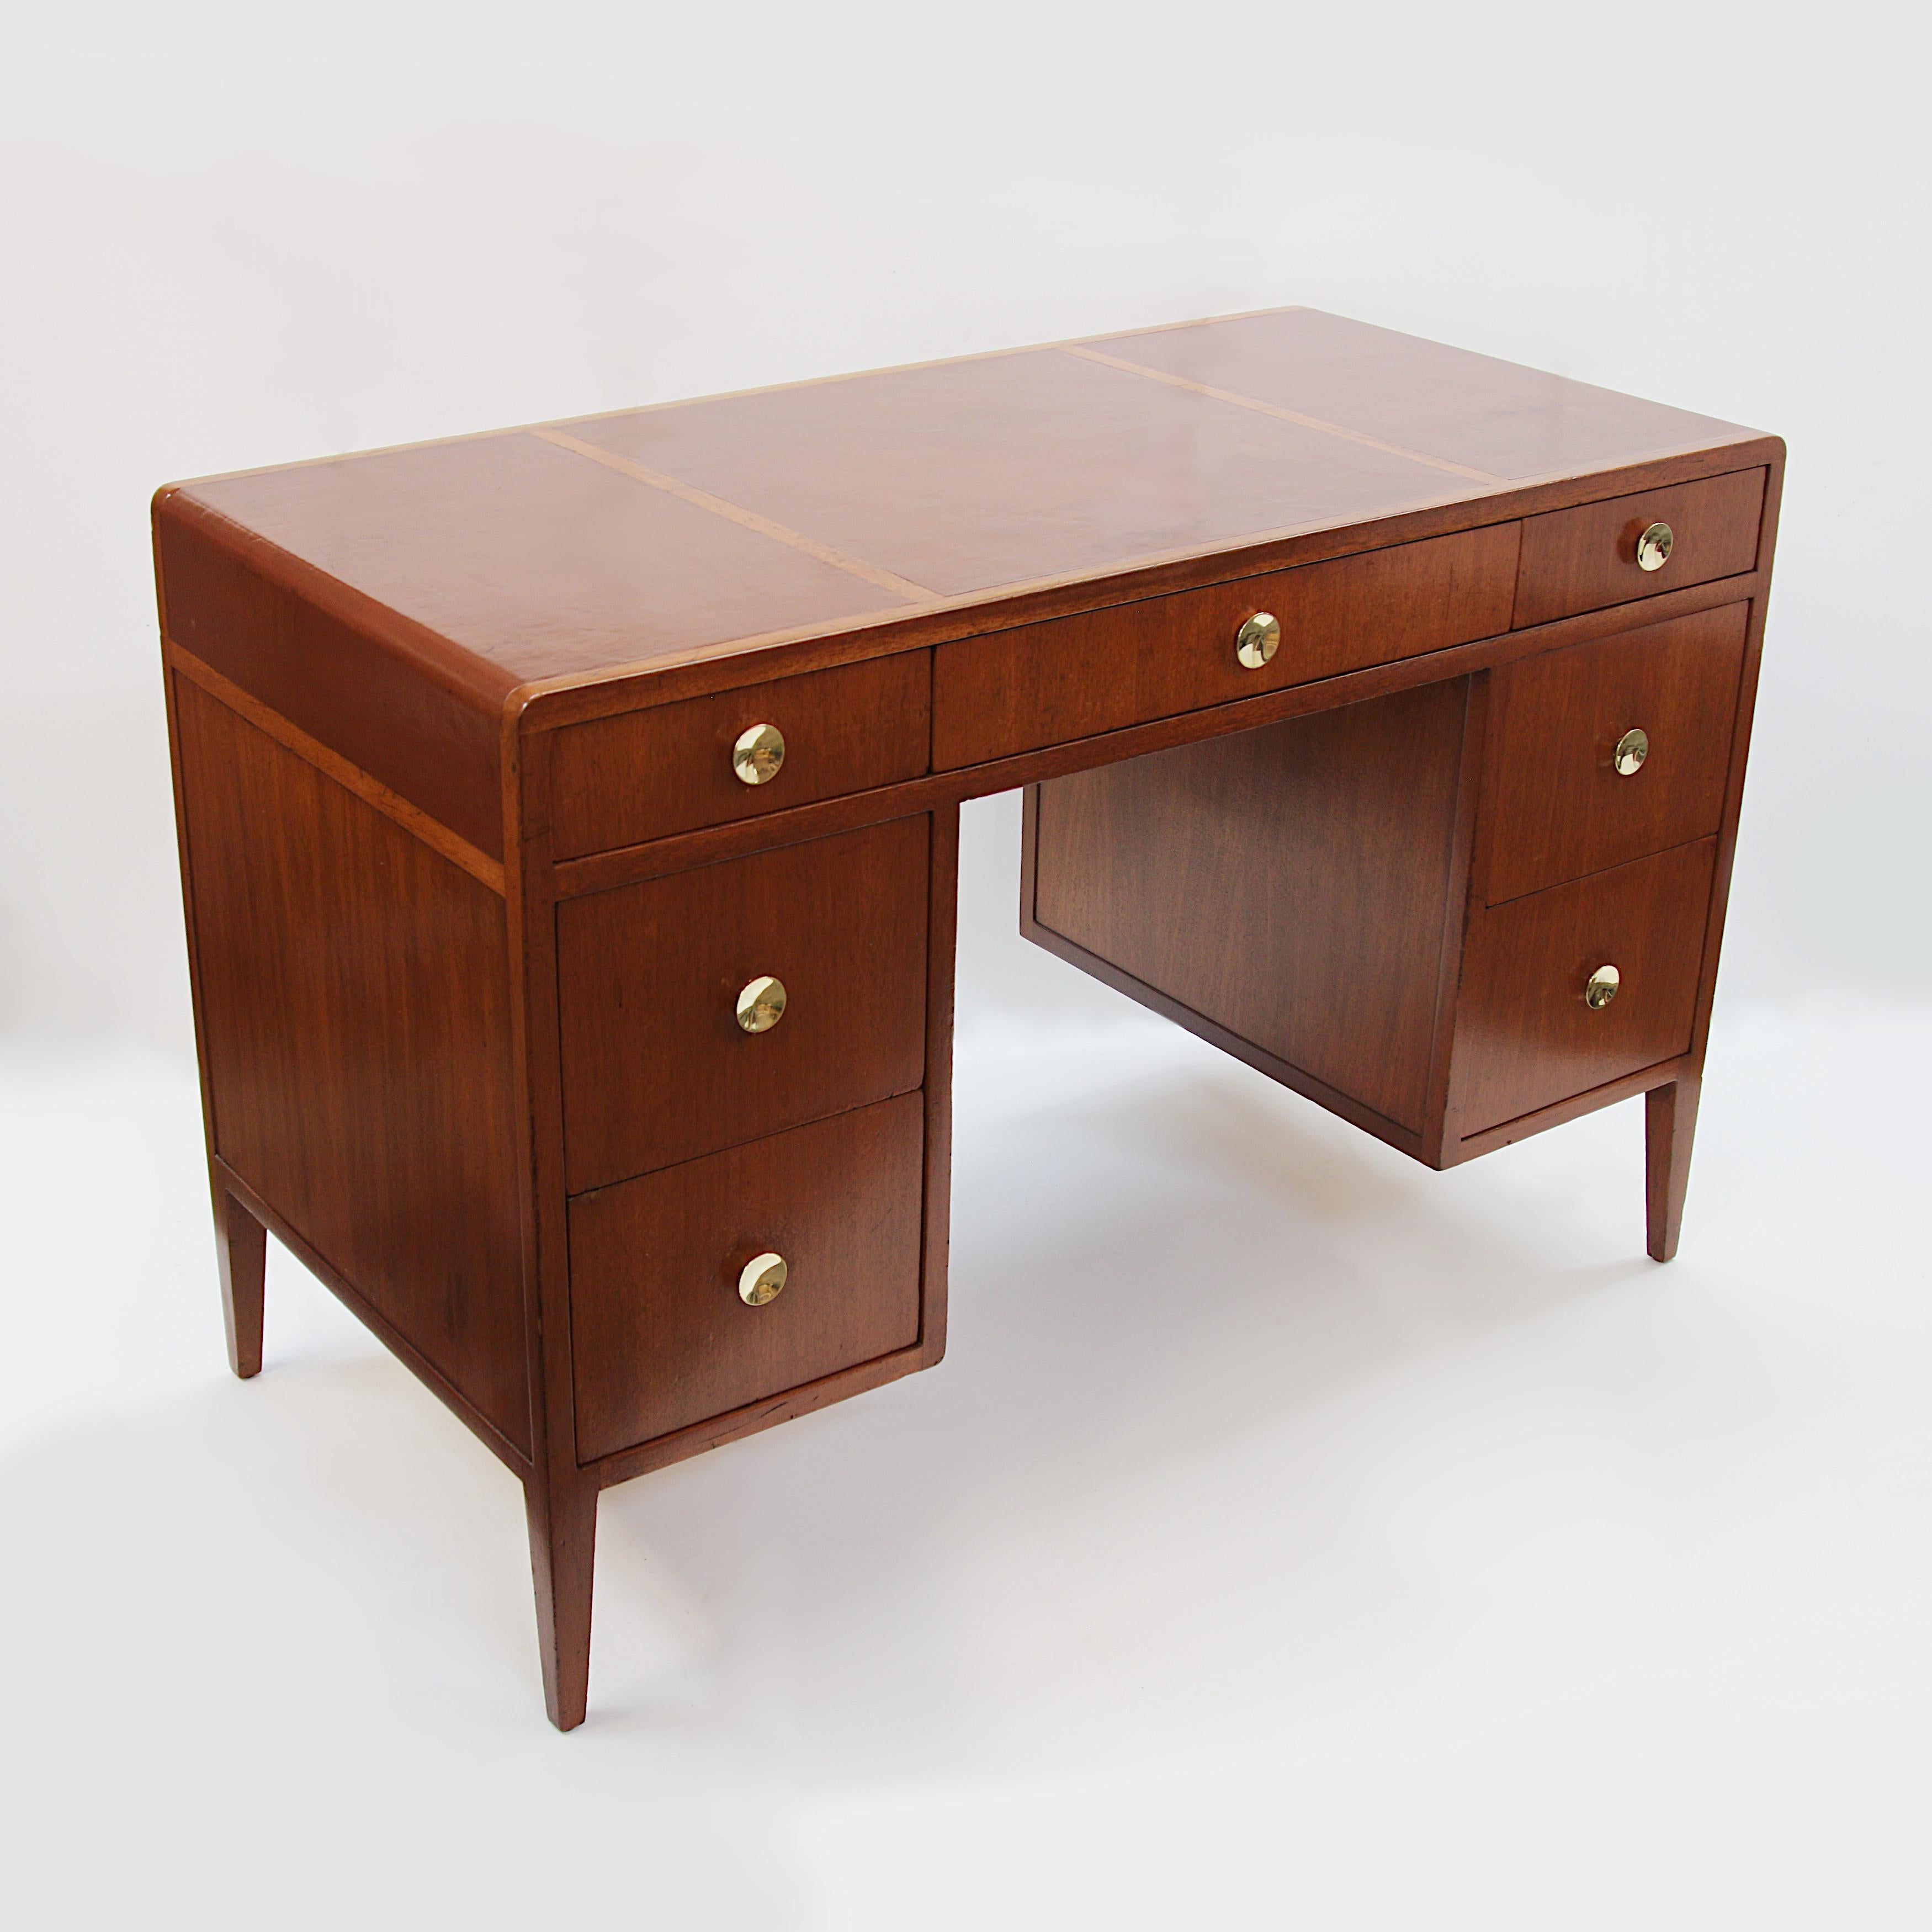 Rare, early kneehole writing desk by Edward Wormley for Dunbar. Desk features Mahogany and oak construction, solid brass hardware, inlaid leather top and unique, rounded 'waterfall' ends. A nice little desk packed with tons of charm and dimensions